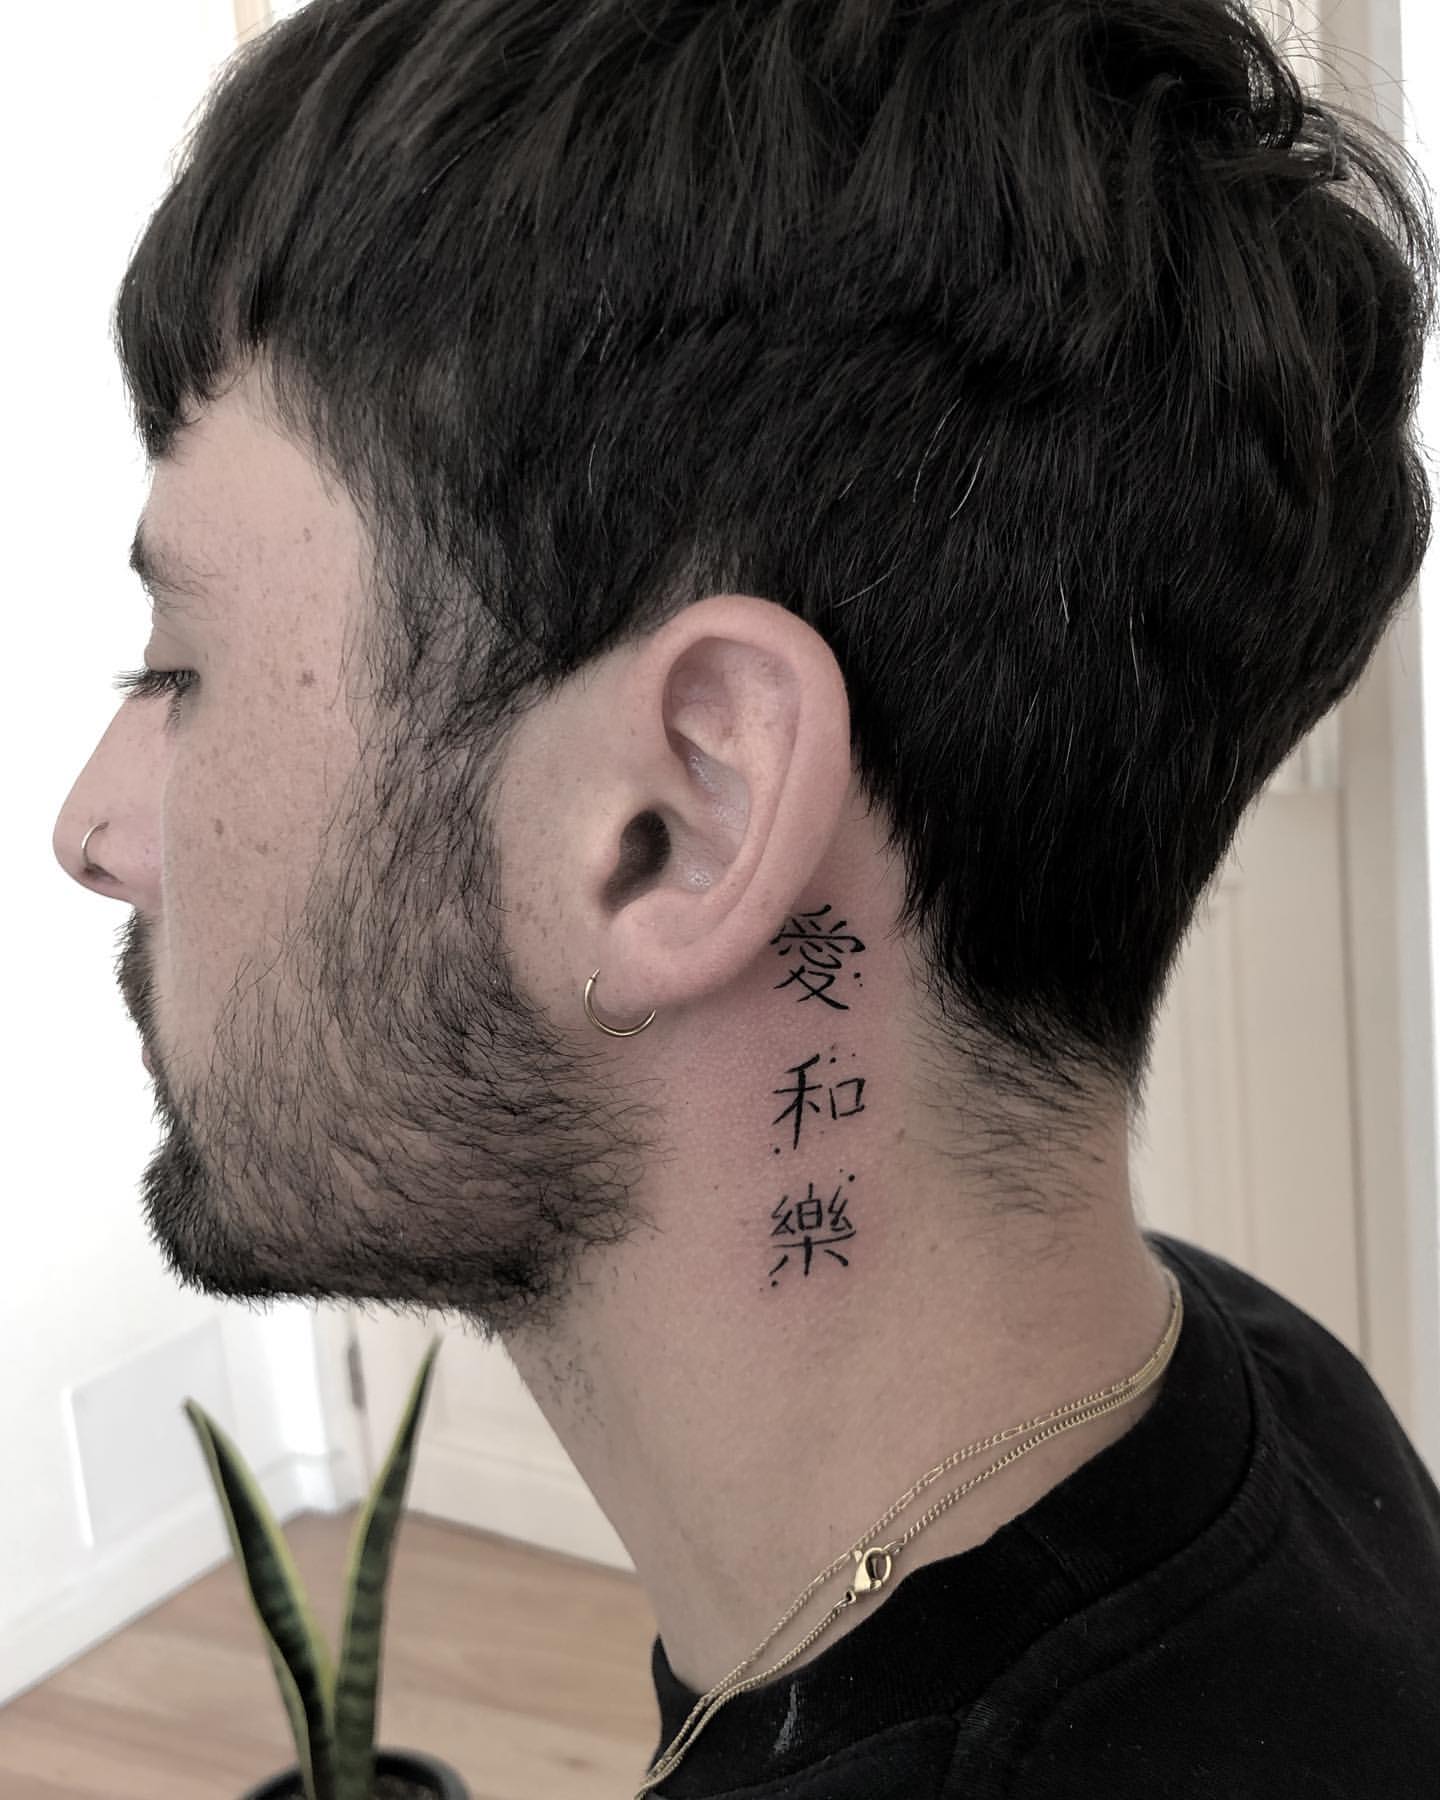 Behind the Ear Tattoos for Men 4